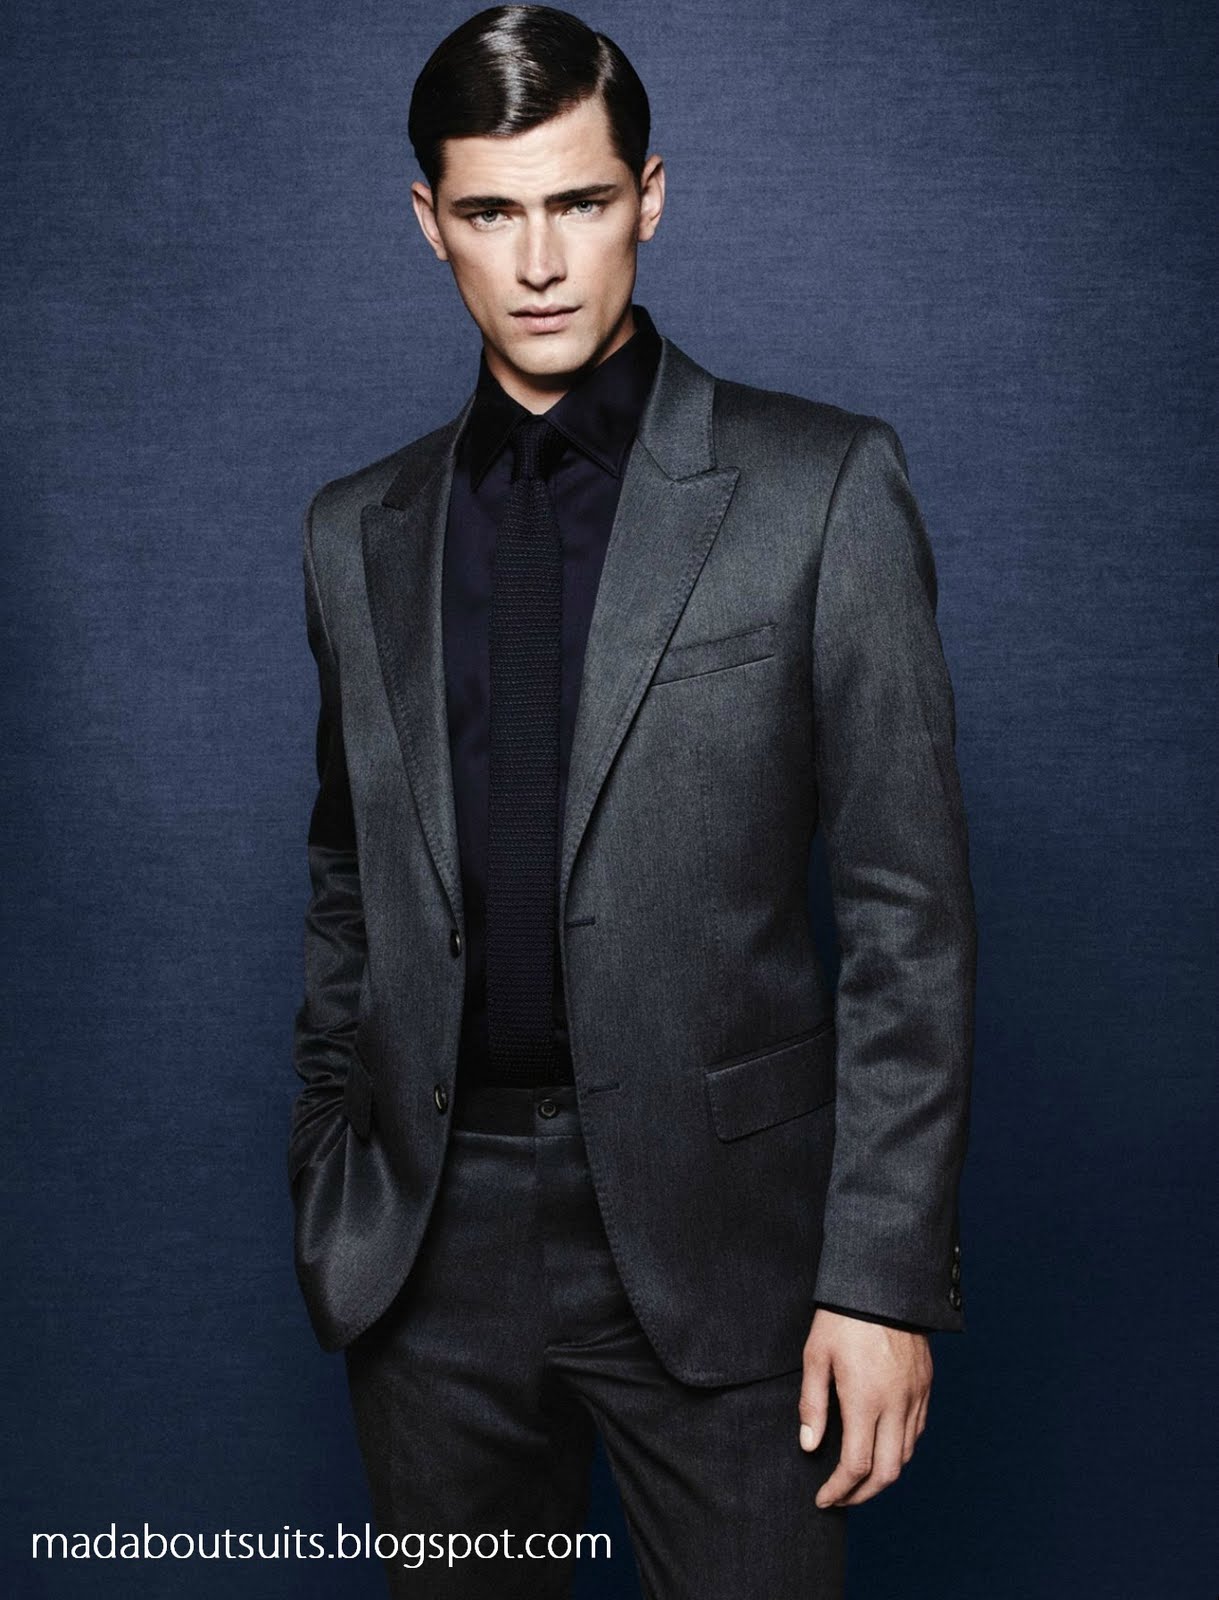 The Awesome Sean O'Pry in Zara Suit